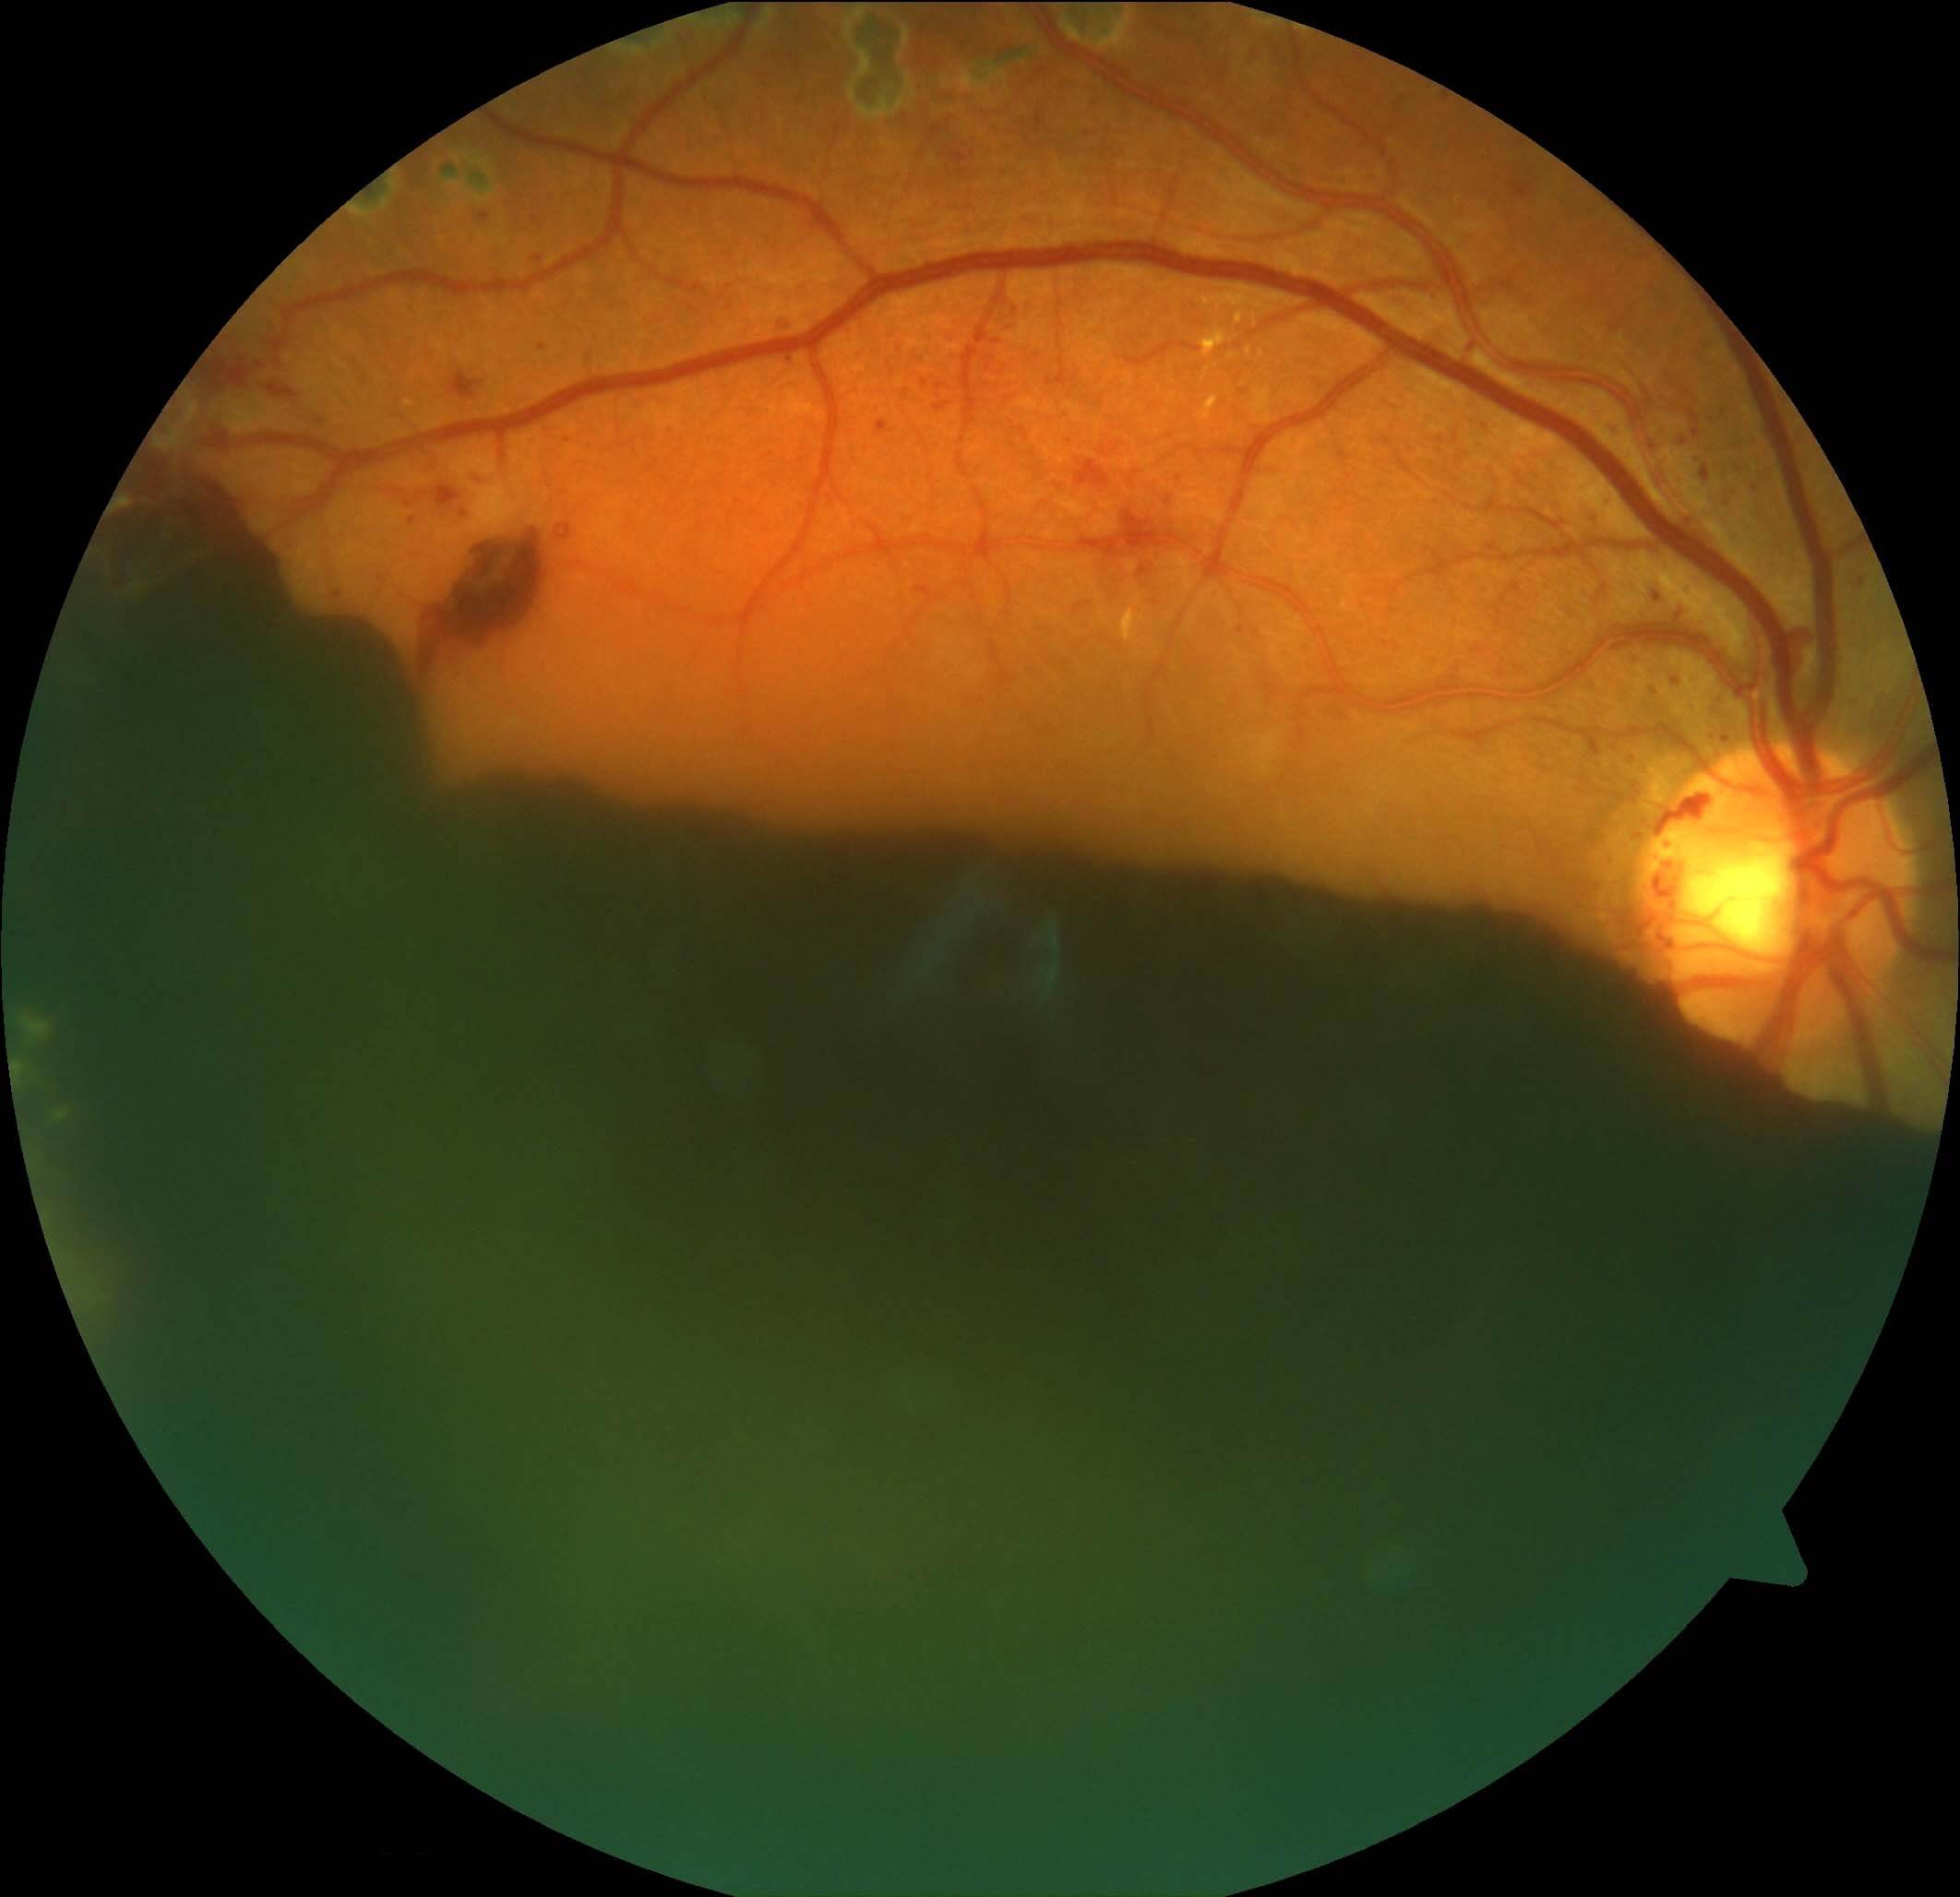 Despite panretinal photocoagulation laser treatment in the right eye the patient suffered a large preretinal haemorrhage. Some laser burns can be seen just outside the superior arcade.